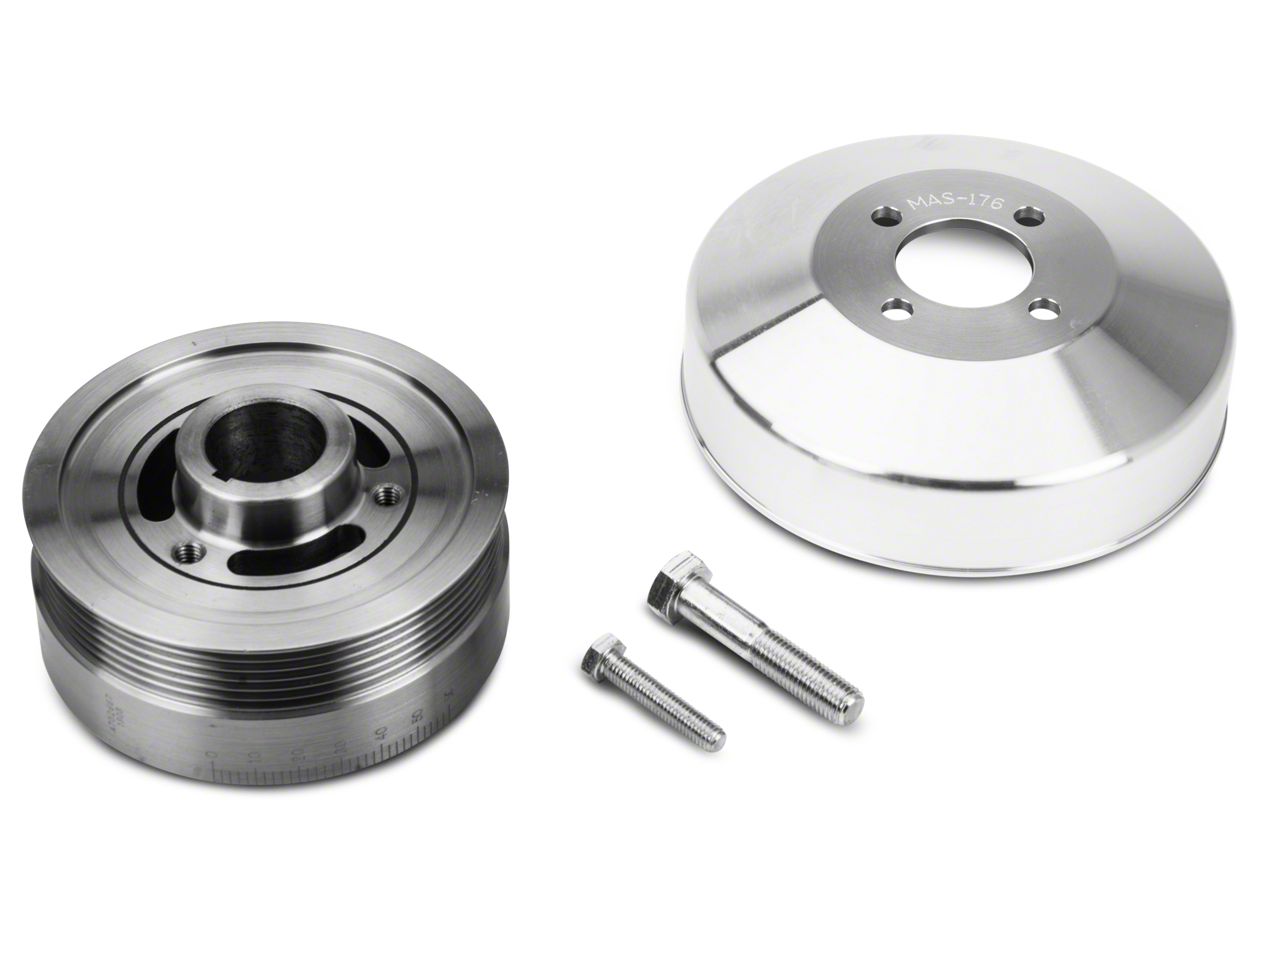 Mustang Underdrive Pulleys